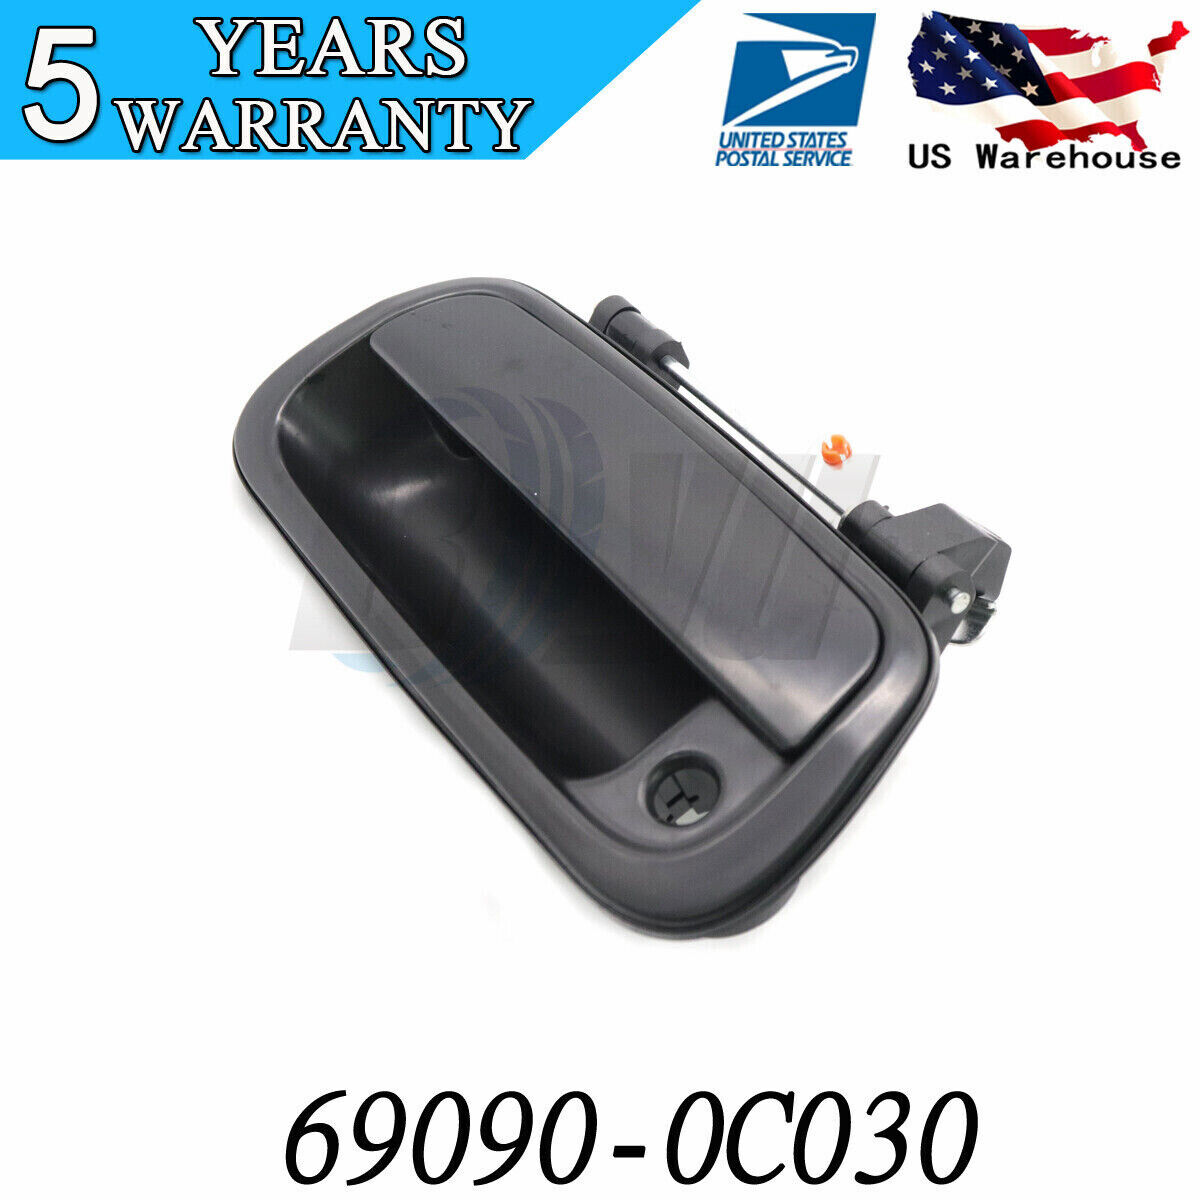 Black For Toyota Pickup Tundra Truck 2000-2006 Tail Gate Tailgate Handle Texture